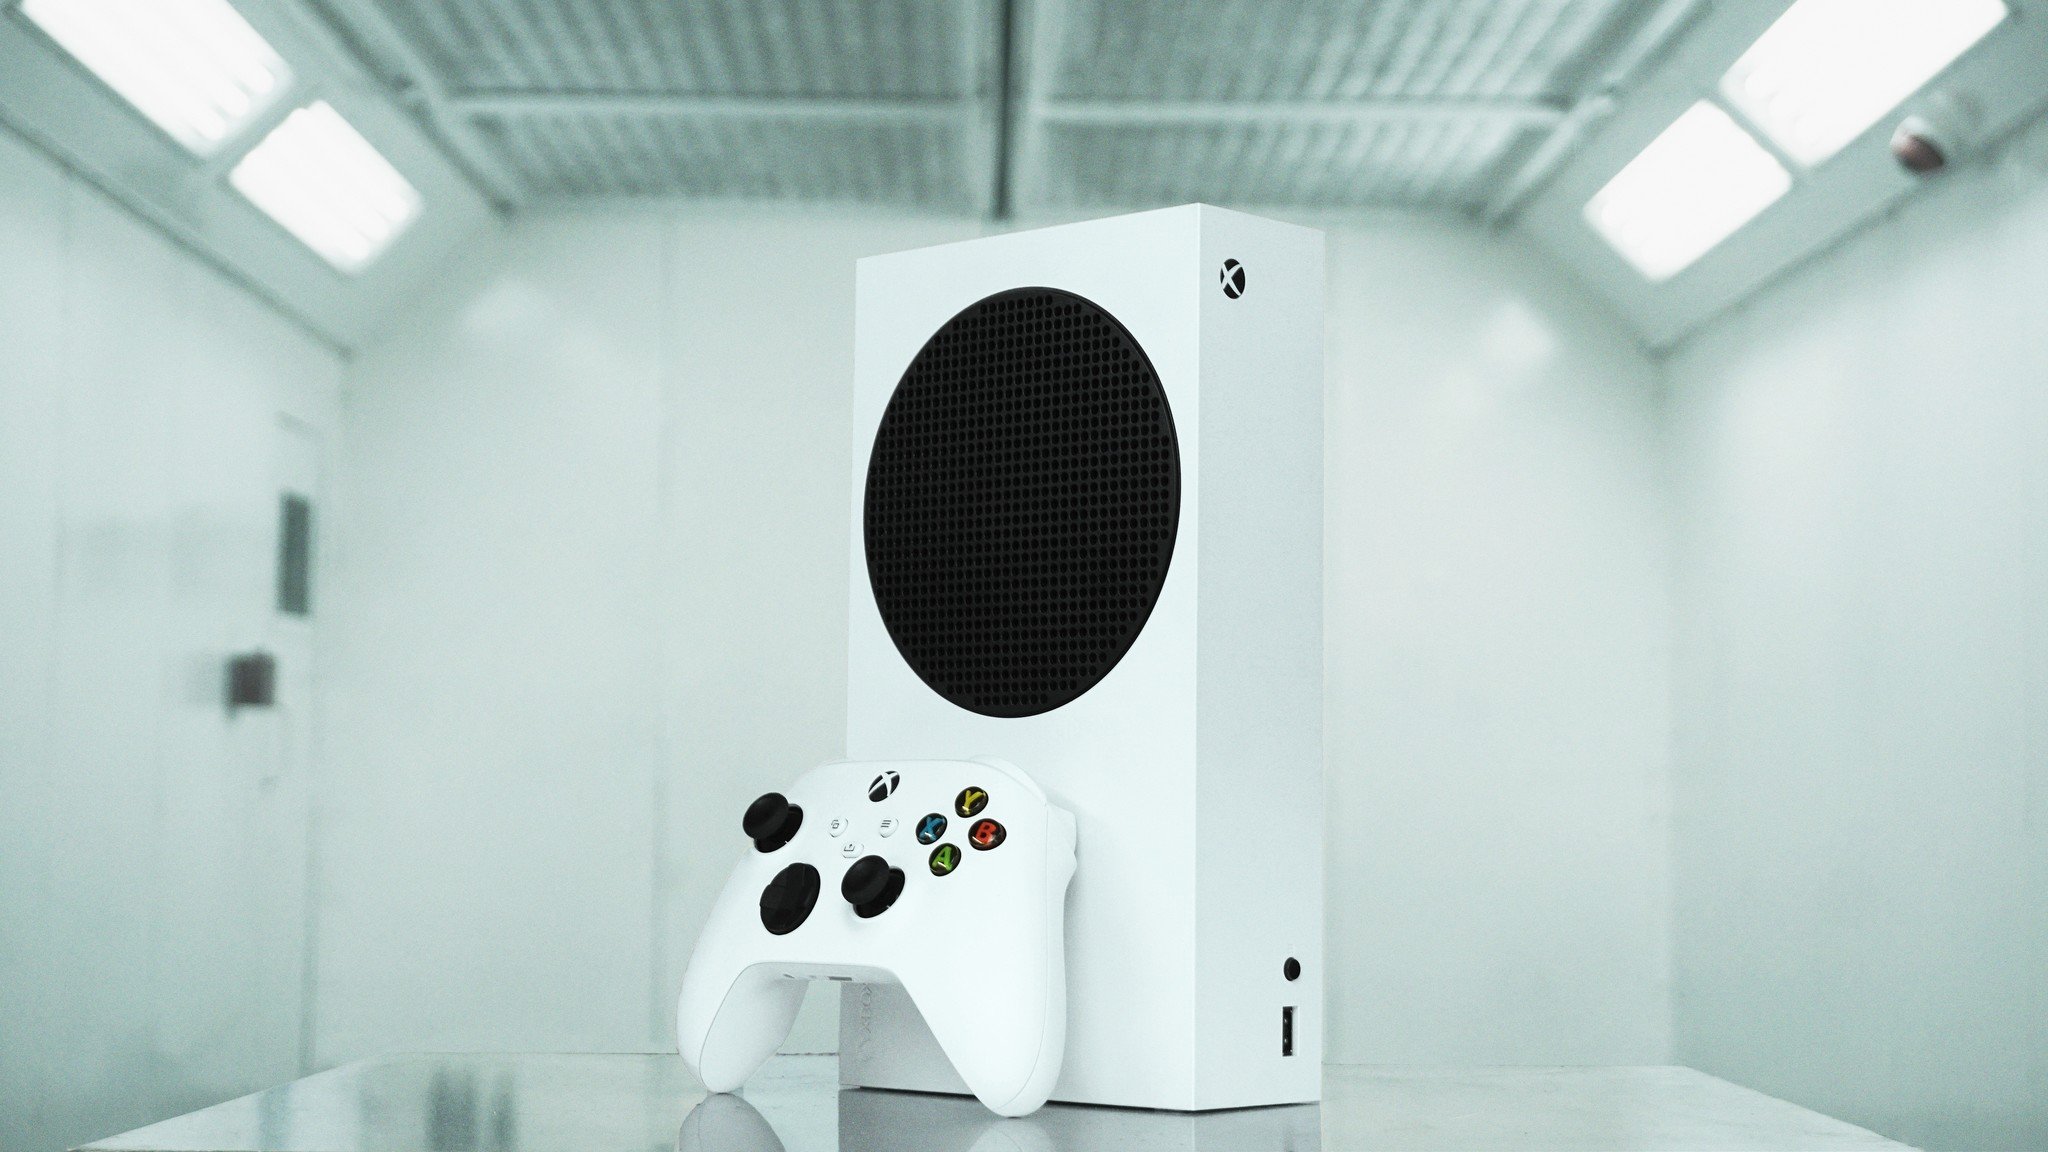 Xbox Series S review: Modern gaming at an affordable price